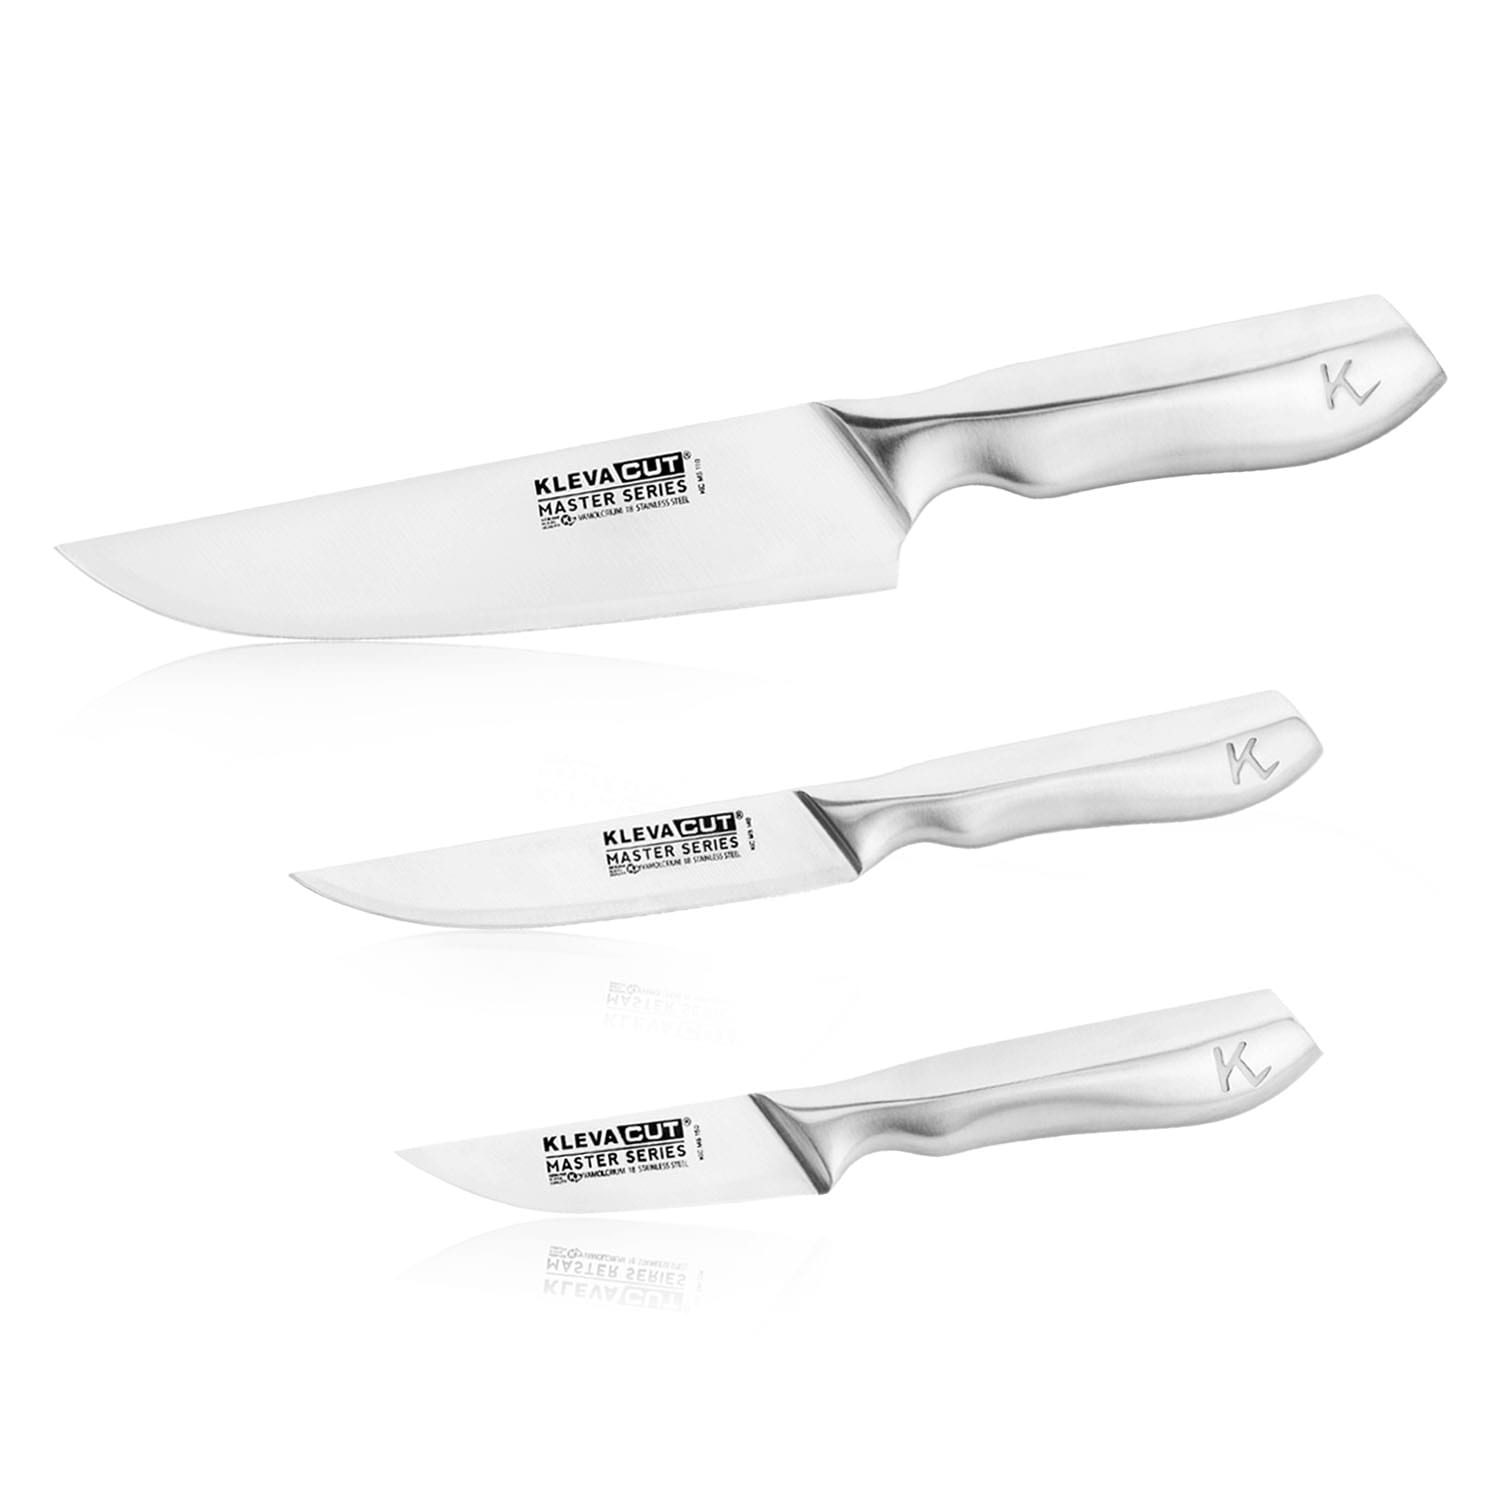 KlevaCut® Master Series New 3pc Knife Set - Chef, Utility + Paring Knives  Woolworths Marketplace   